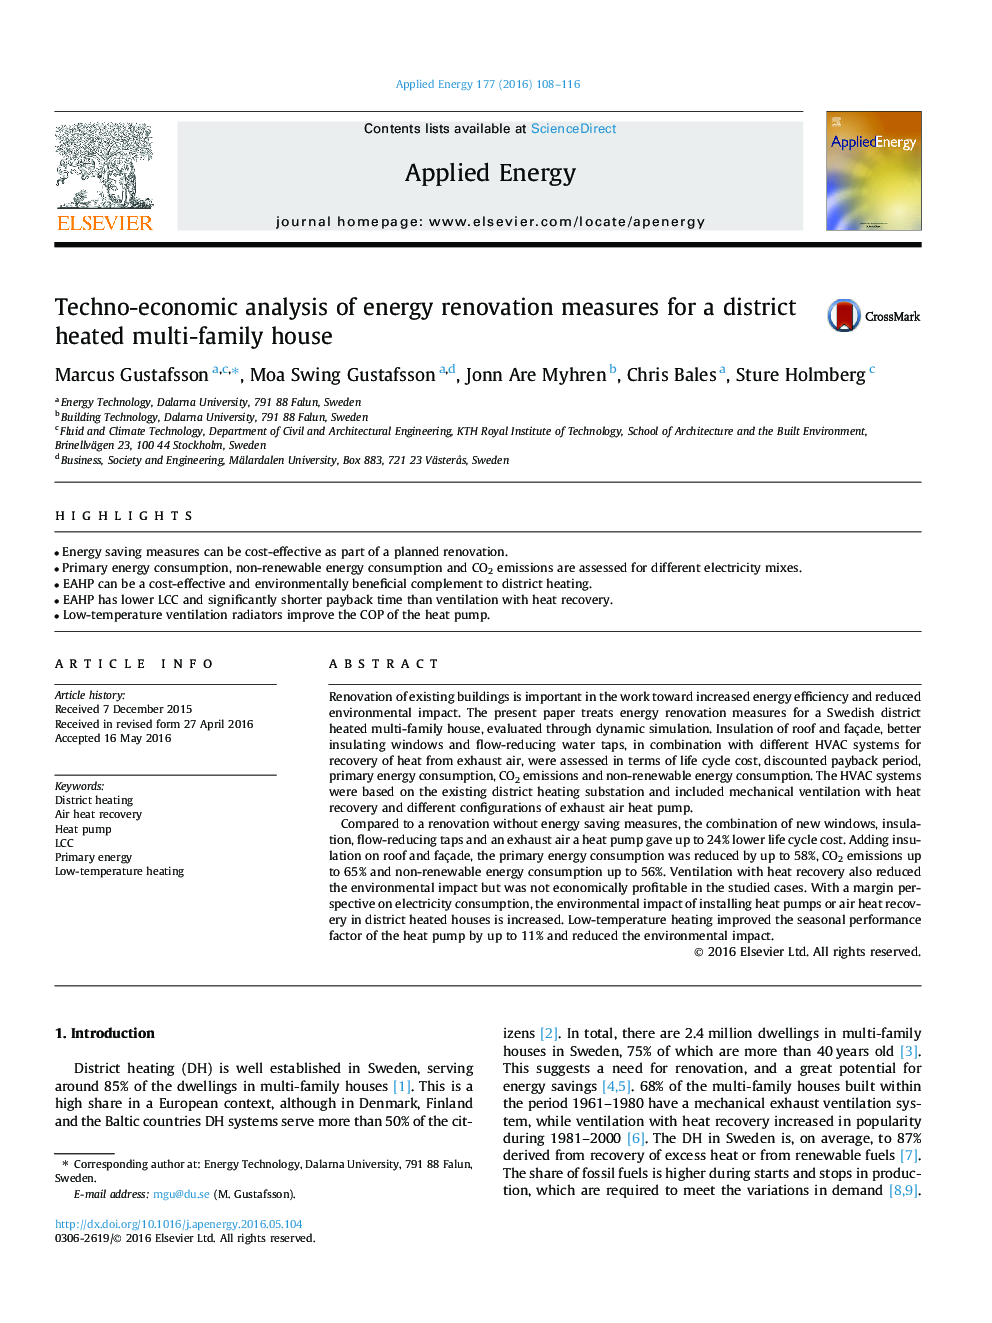 Techno-economic analysis of energy renovation measures for a district heated multi-family house